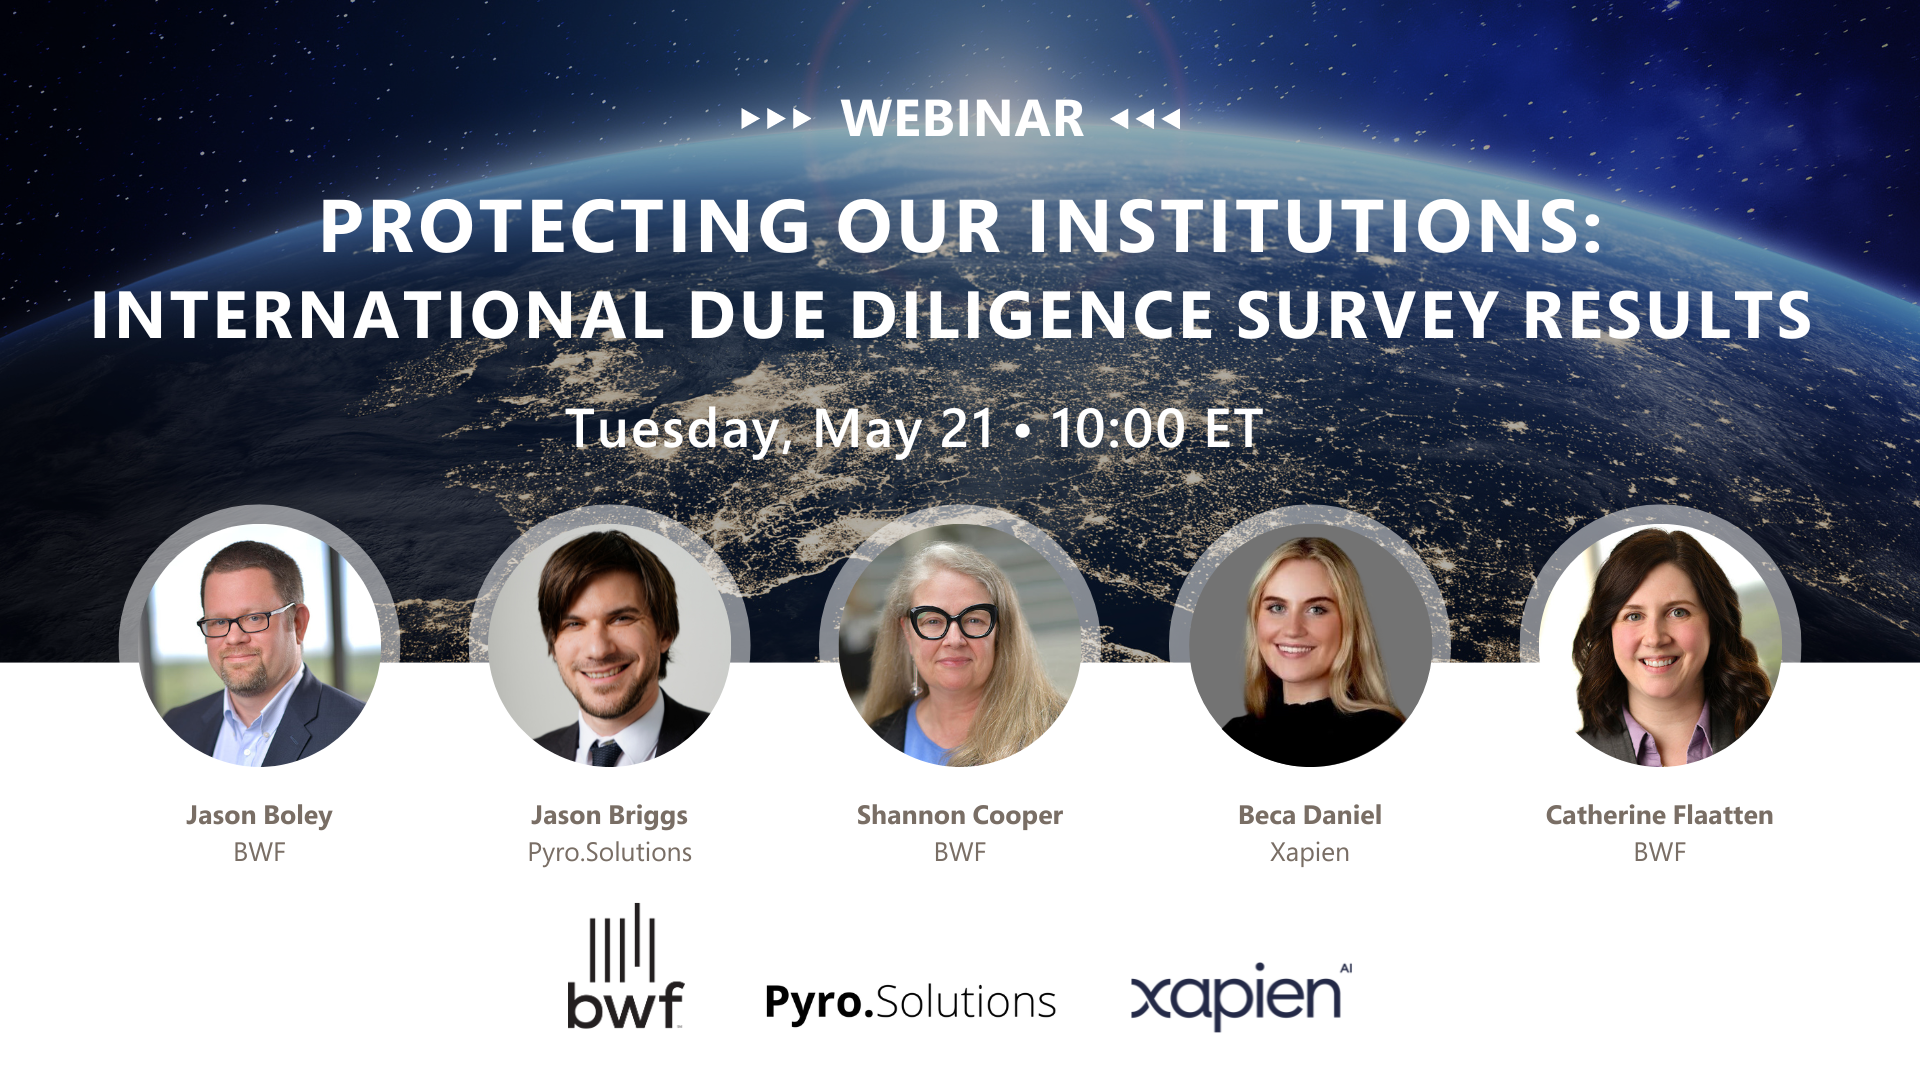 Protecting Our Institutions: International Due Diligence Survey Results